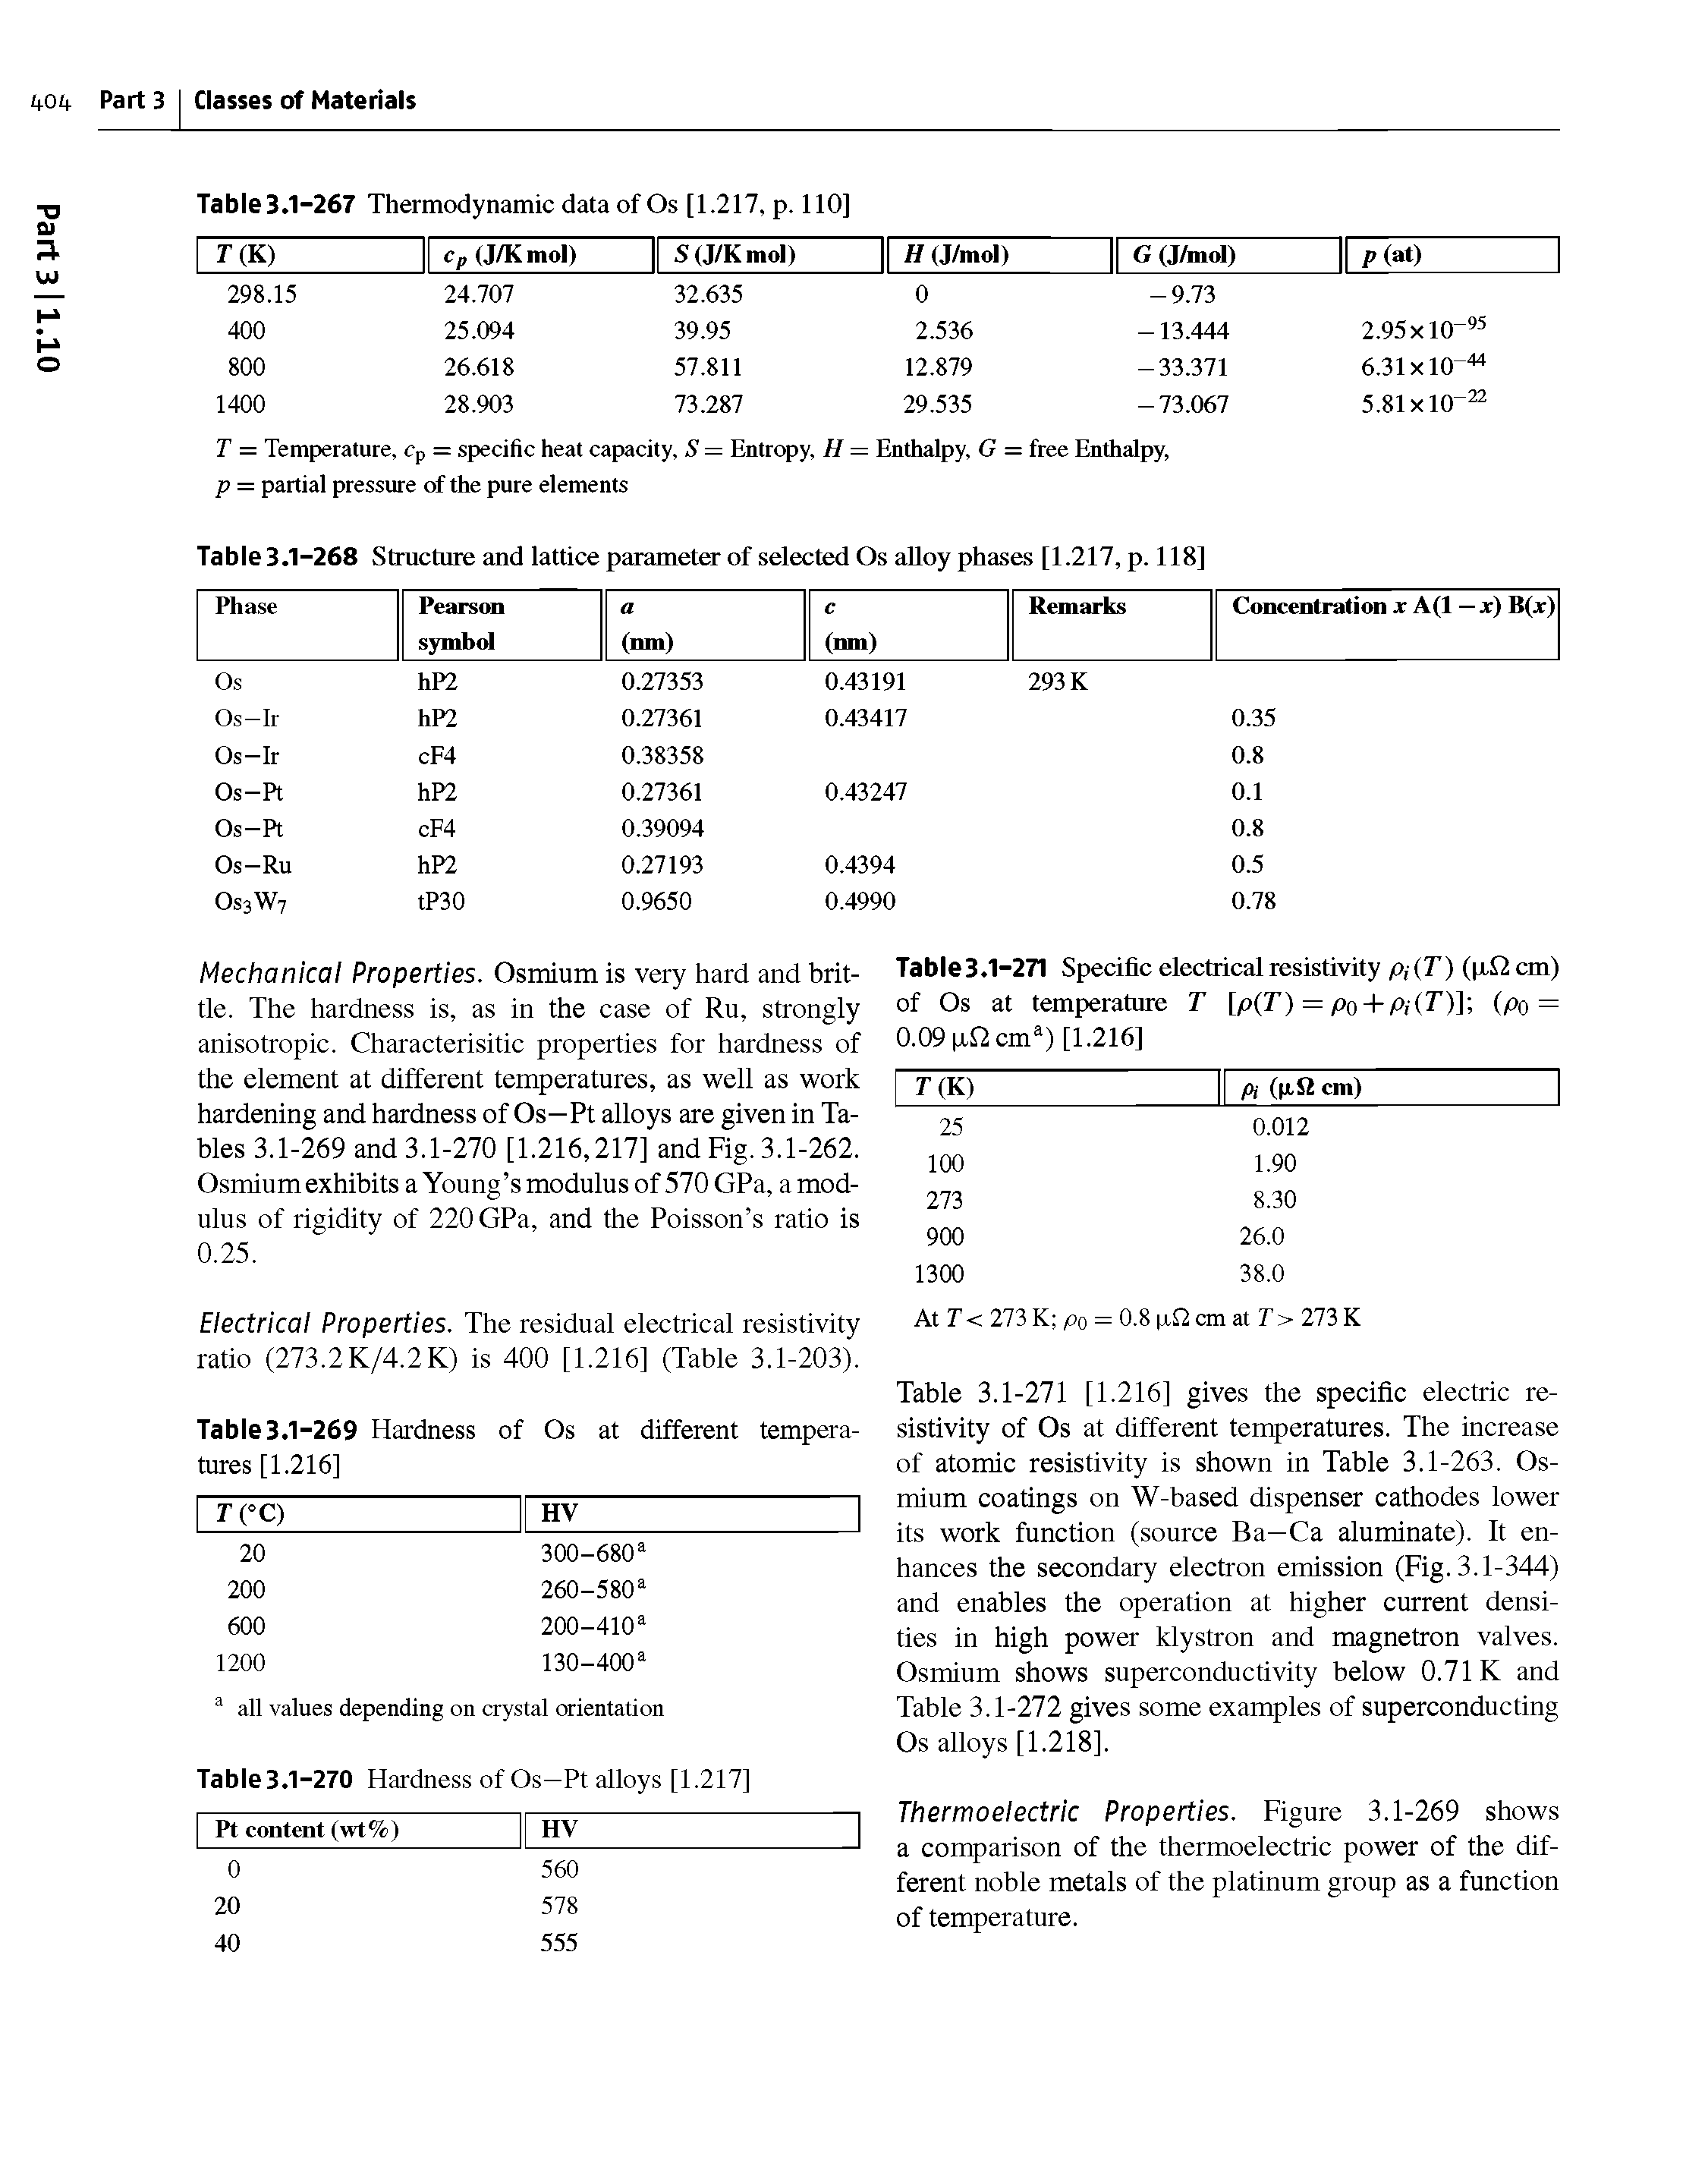 Table 3.1-271 [1.216] gives the specific electric resistivity of Os at different temperatures. The increase of atomic resistivity is shown in Table 3.1-263. Osmium coatings on W-based dispenser cathodes lower its work function (source Ba—Ca aluminate). It enhances the secondary electron emission (Fig. 3.1-344) and enables the operation at higher current densities in high power klystron and magnetron valves. Osmium shows superconductivity below 0.71 K and Table 3.1-272 gives some examples of superconducting Os alloys [1.218].